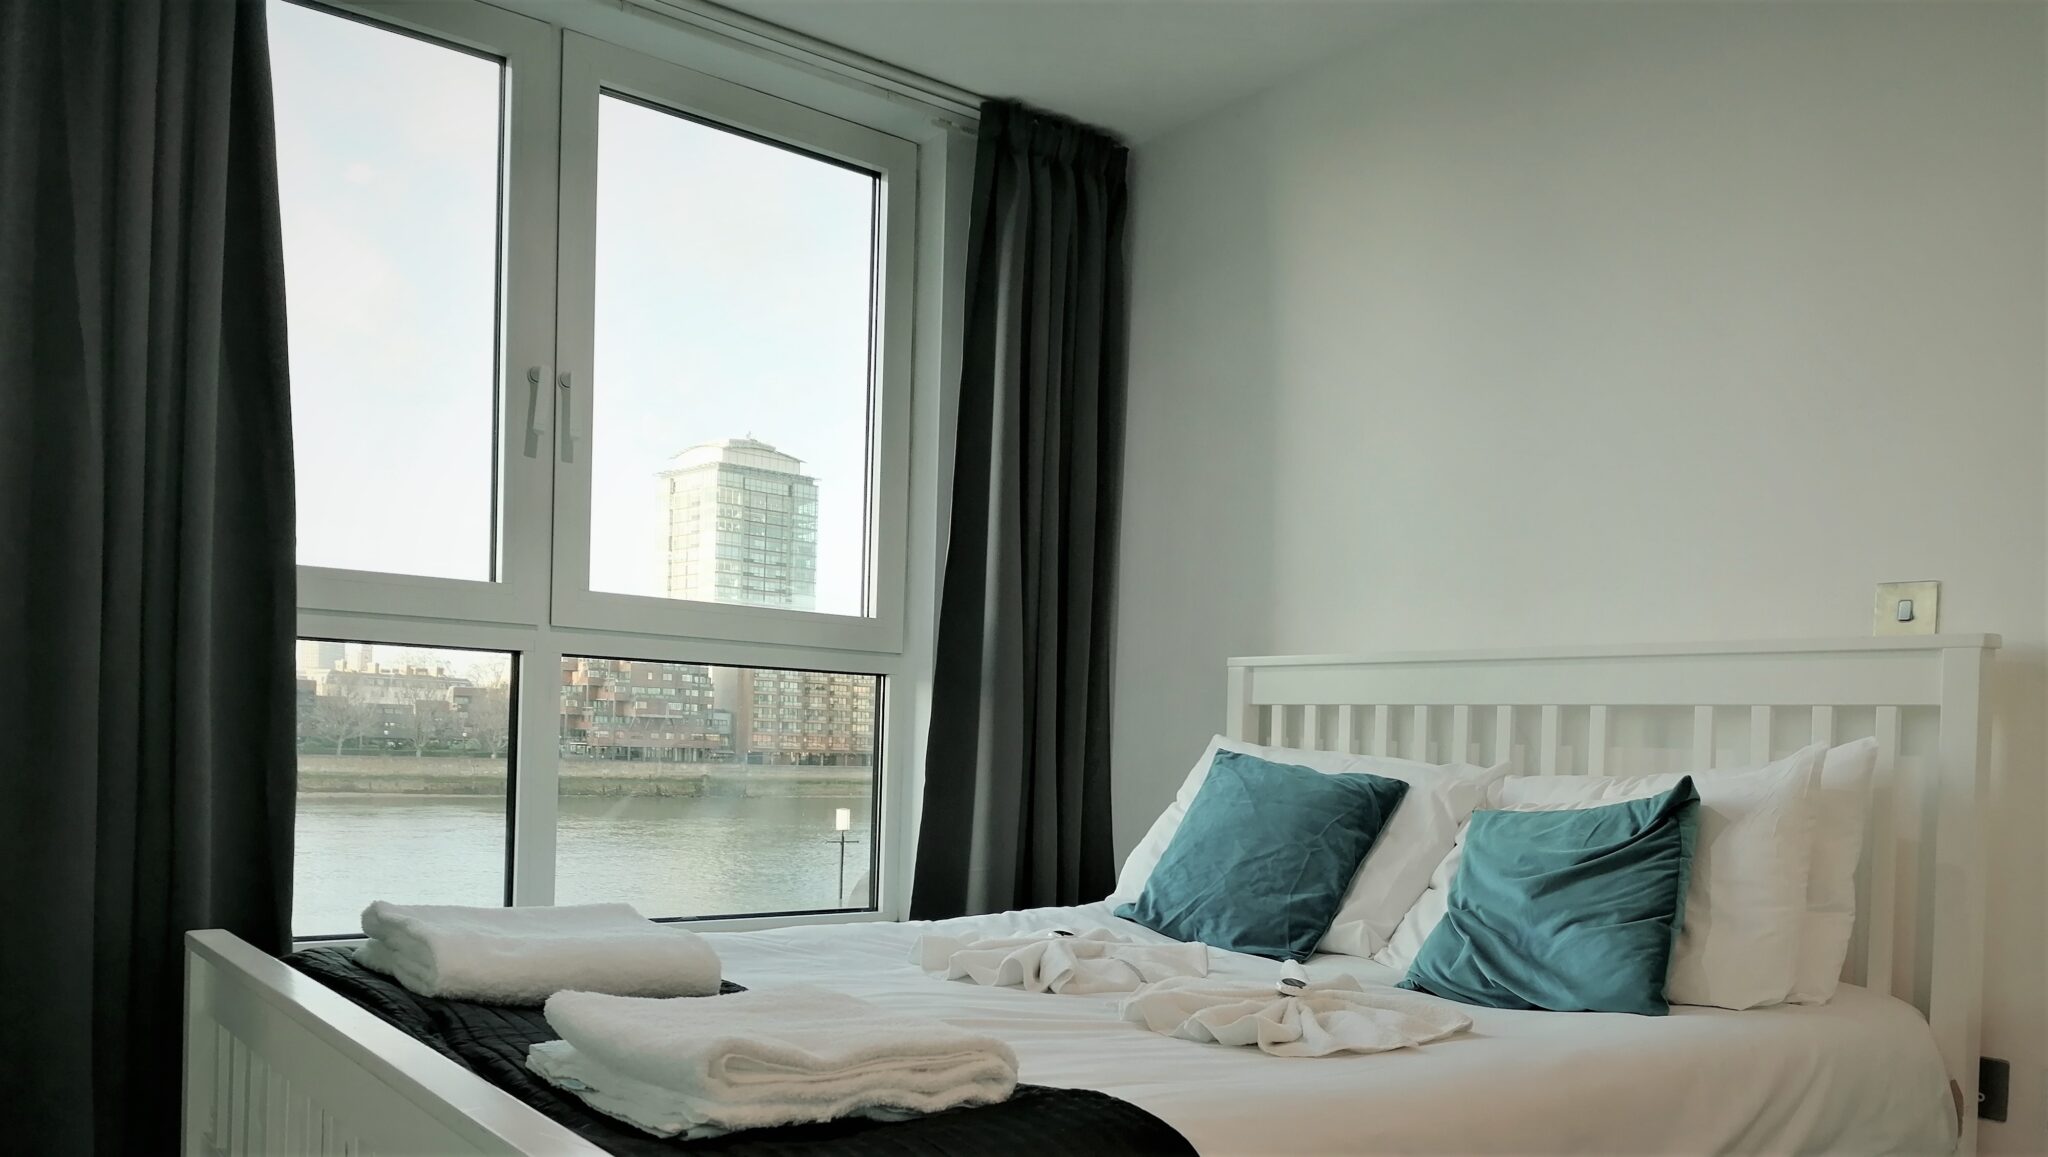 West India Quay Apartments - East London Serviced Apartments - London | Urban Stay